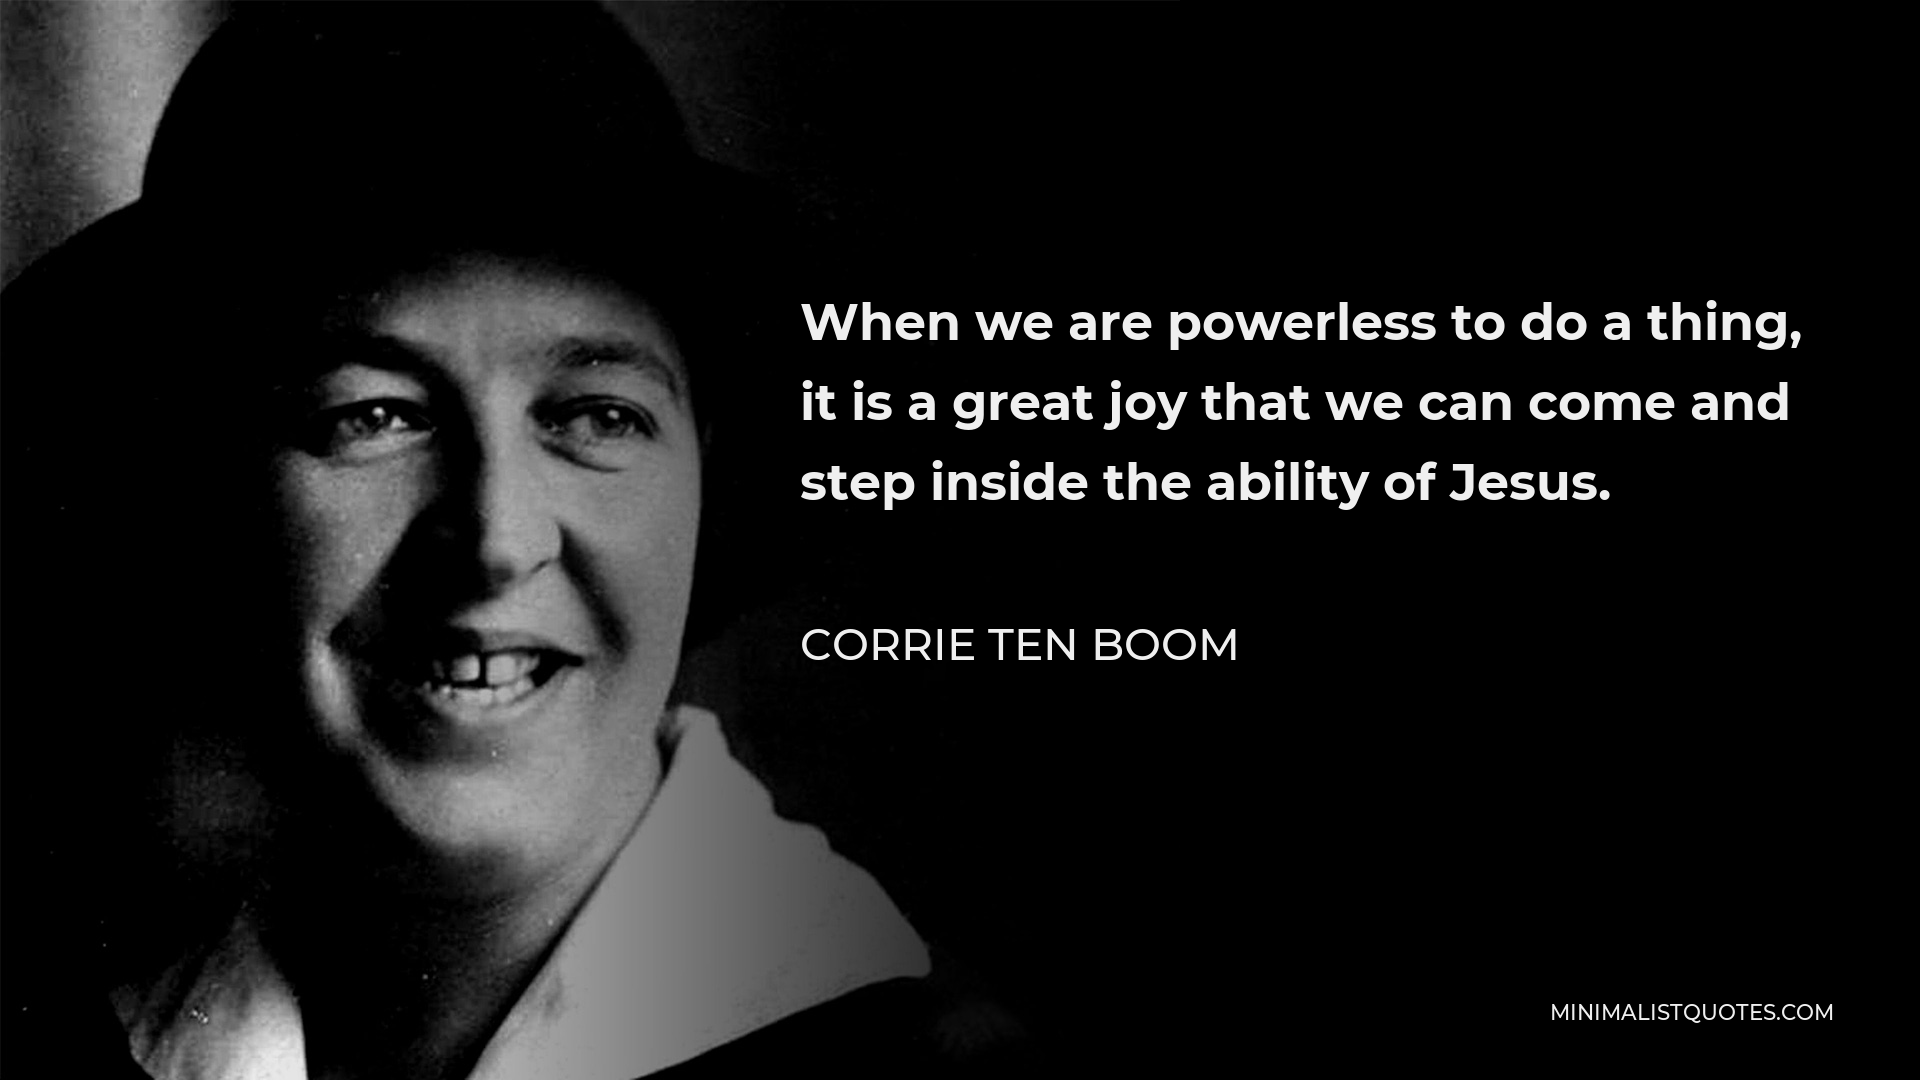 Corrie ten Boom Quote - When we are powerless to do a thing, it is a great joy that we can come and step inside the ability of Jesus.